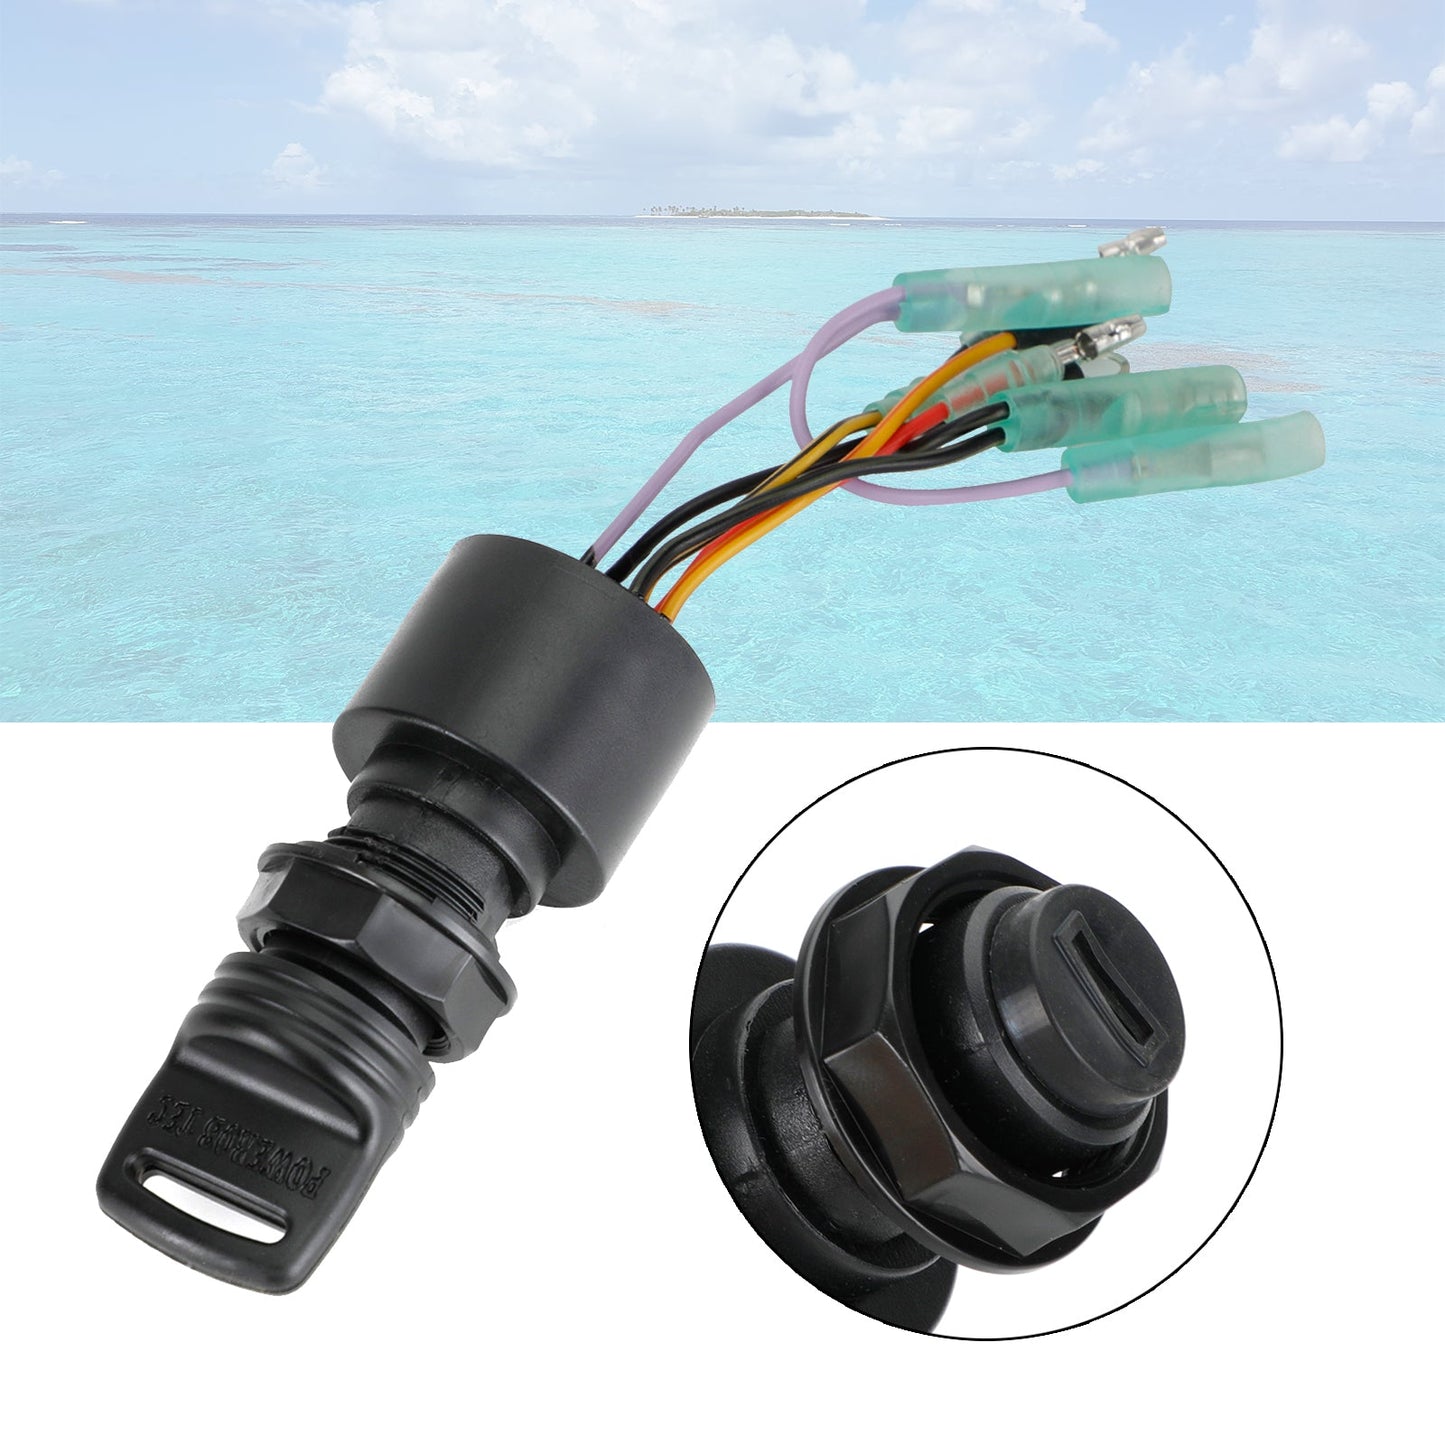 Boat Ignition Key Switch fit for Mercury Outboard Control Box Motor 87-17009A5